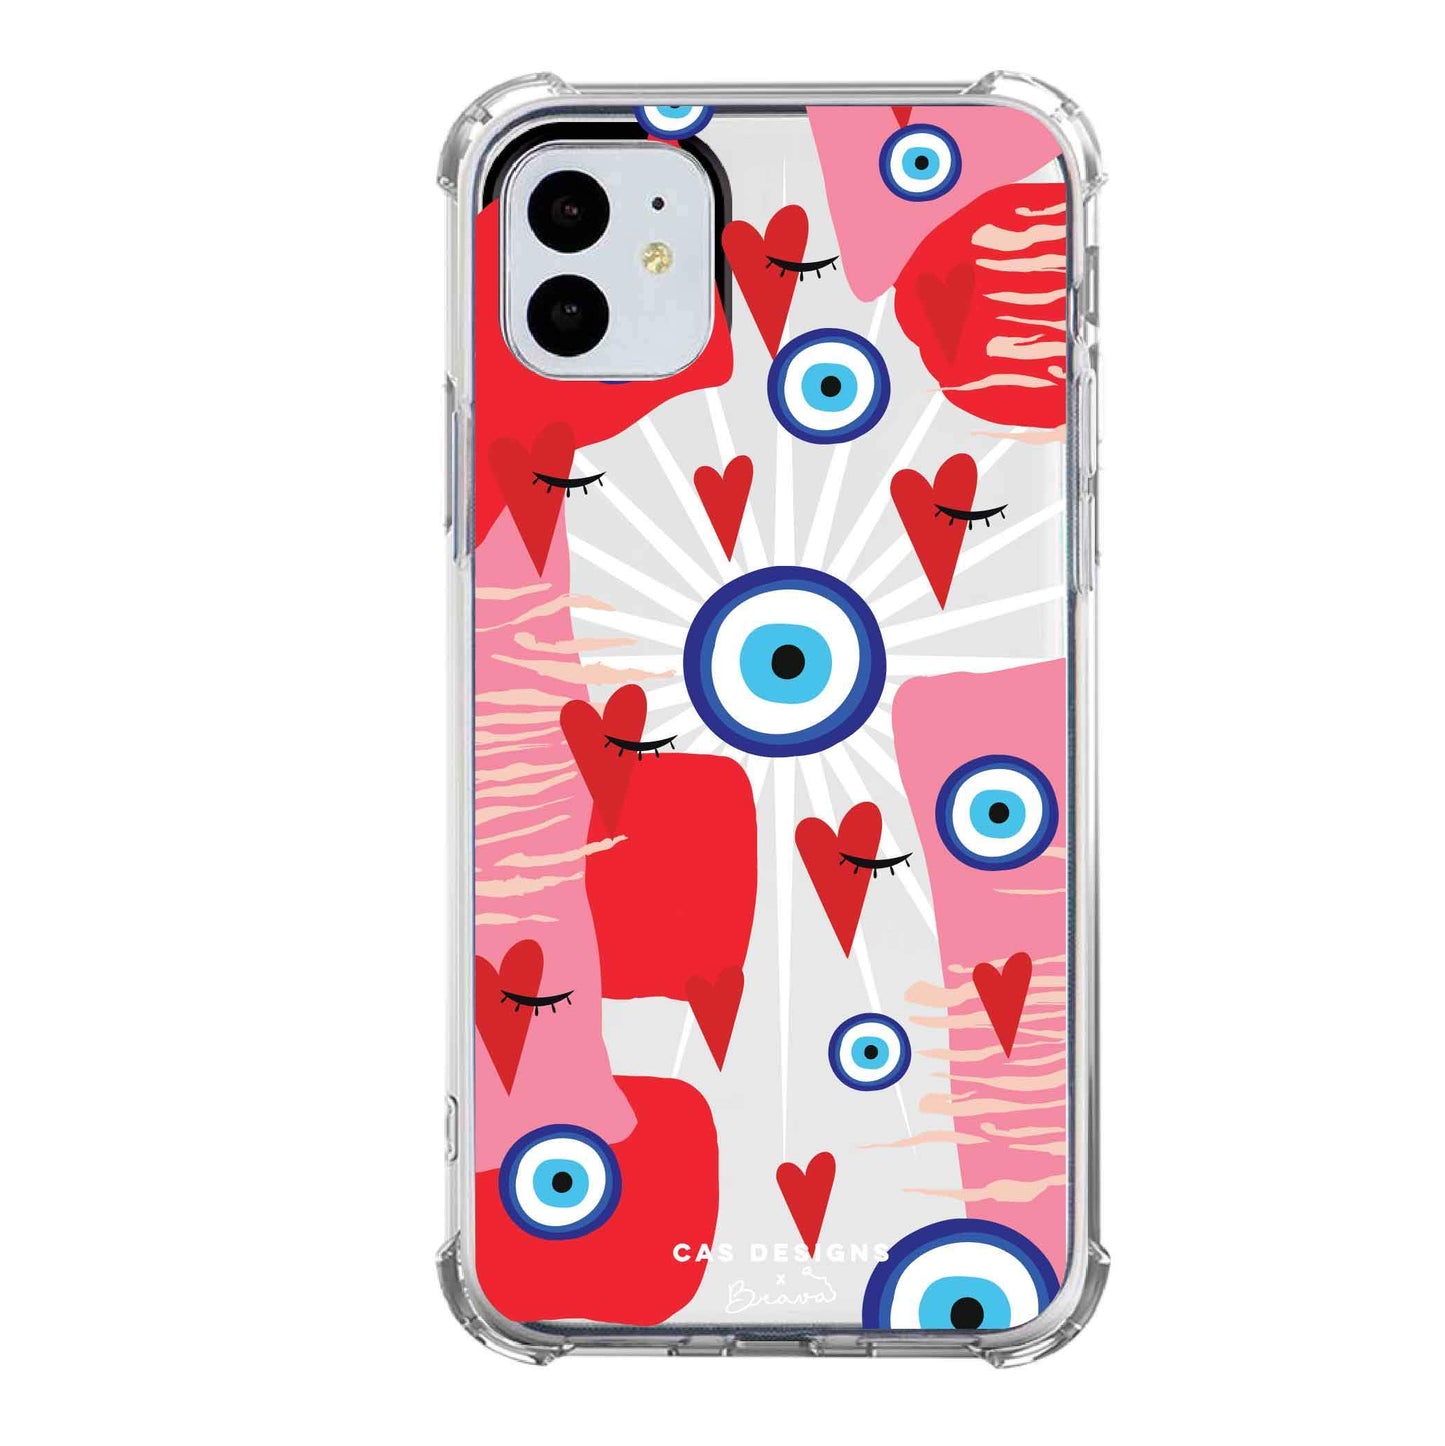 Case brave heart iphone 12 pro max